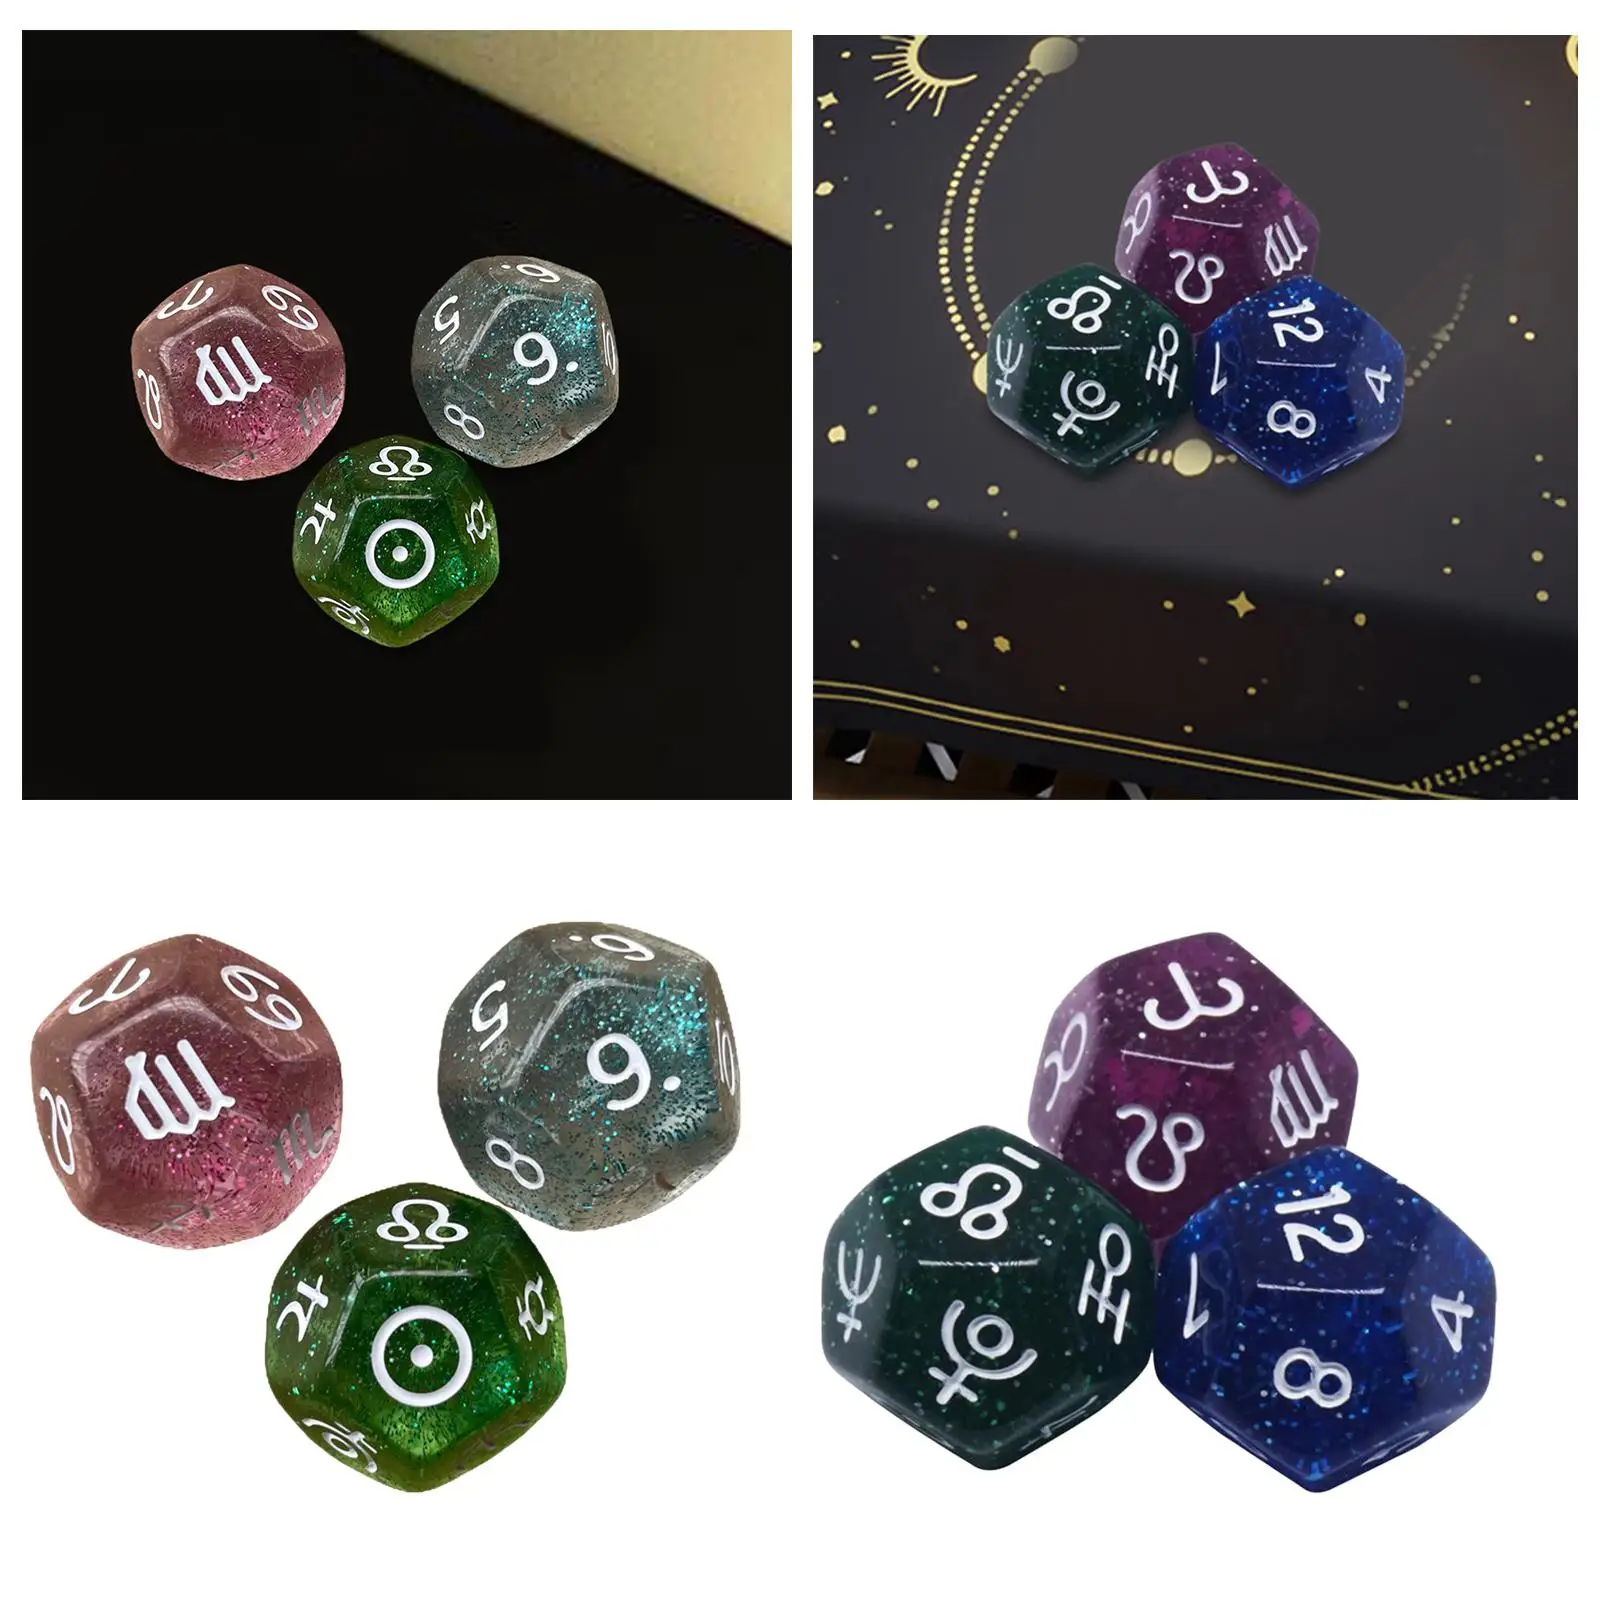 3Pcs Astrological Dice, 12 Sided Polyhedral Dice, Astrology Card Constellation Dice Set